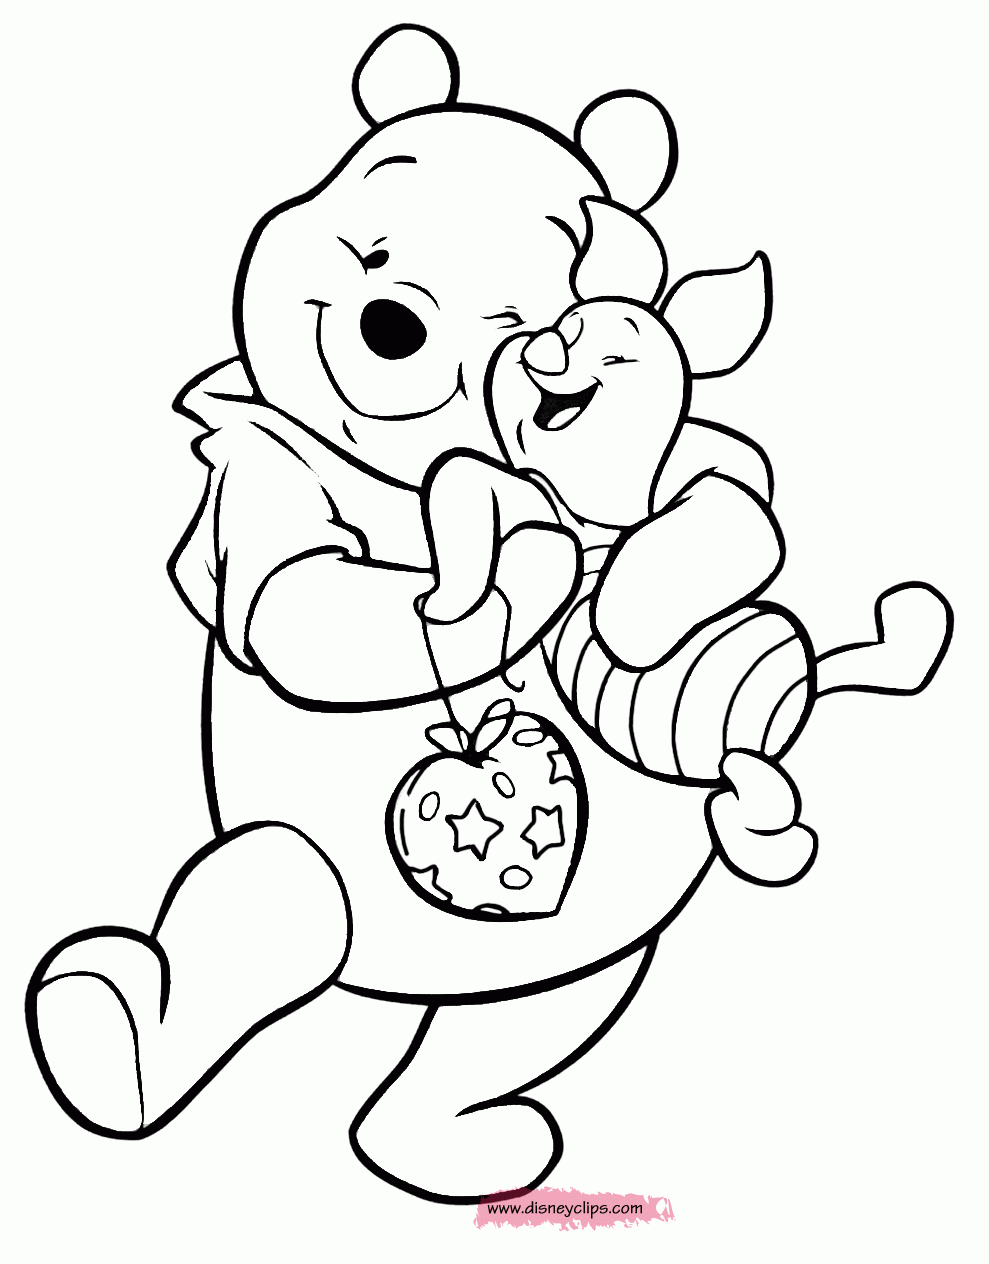 Disney Valentine 39 s Day Coloring Pages Disneyclips